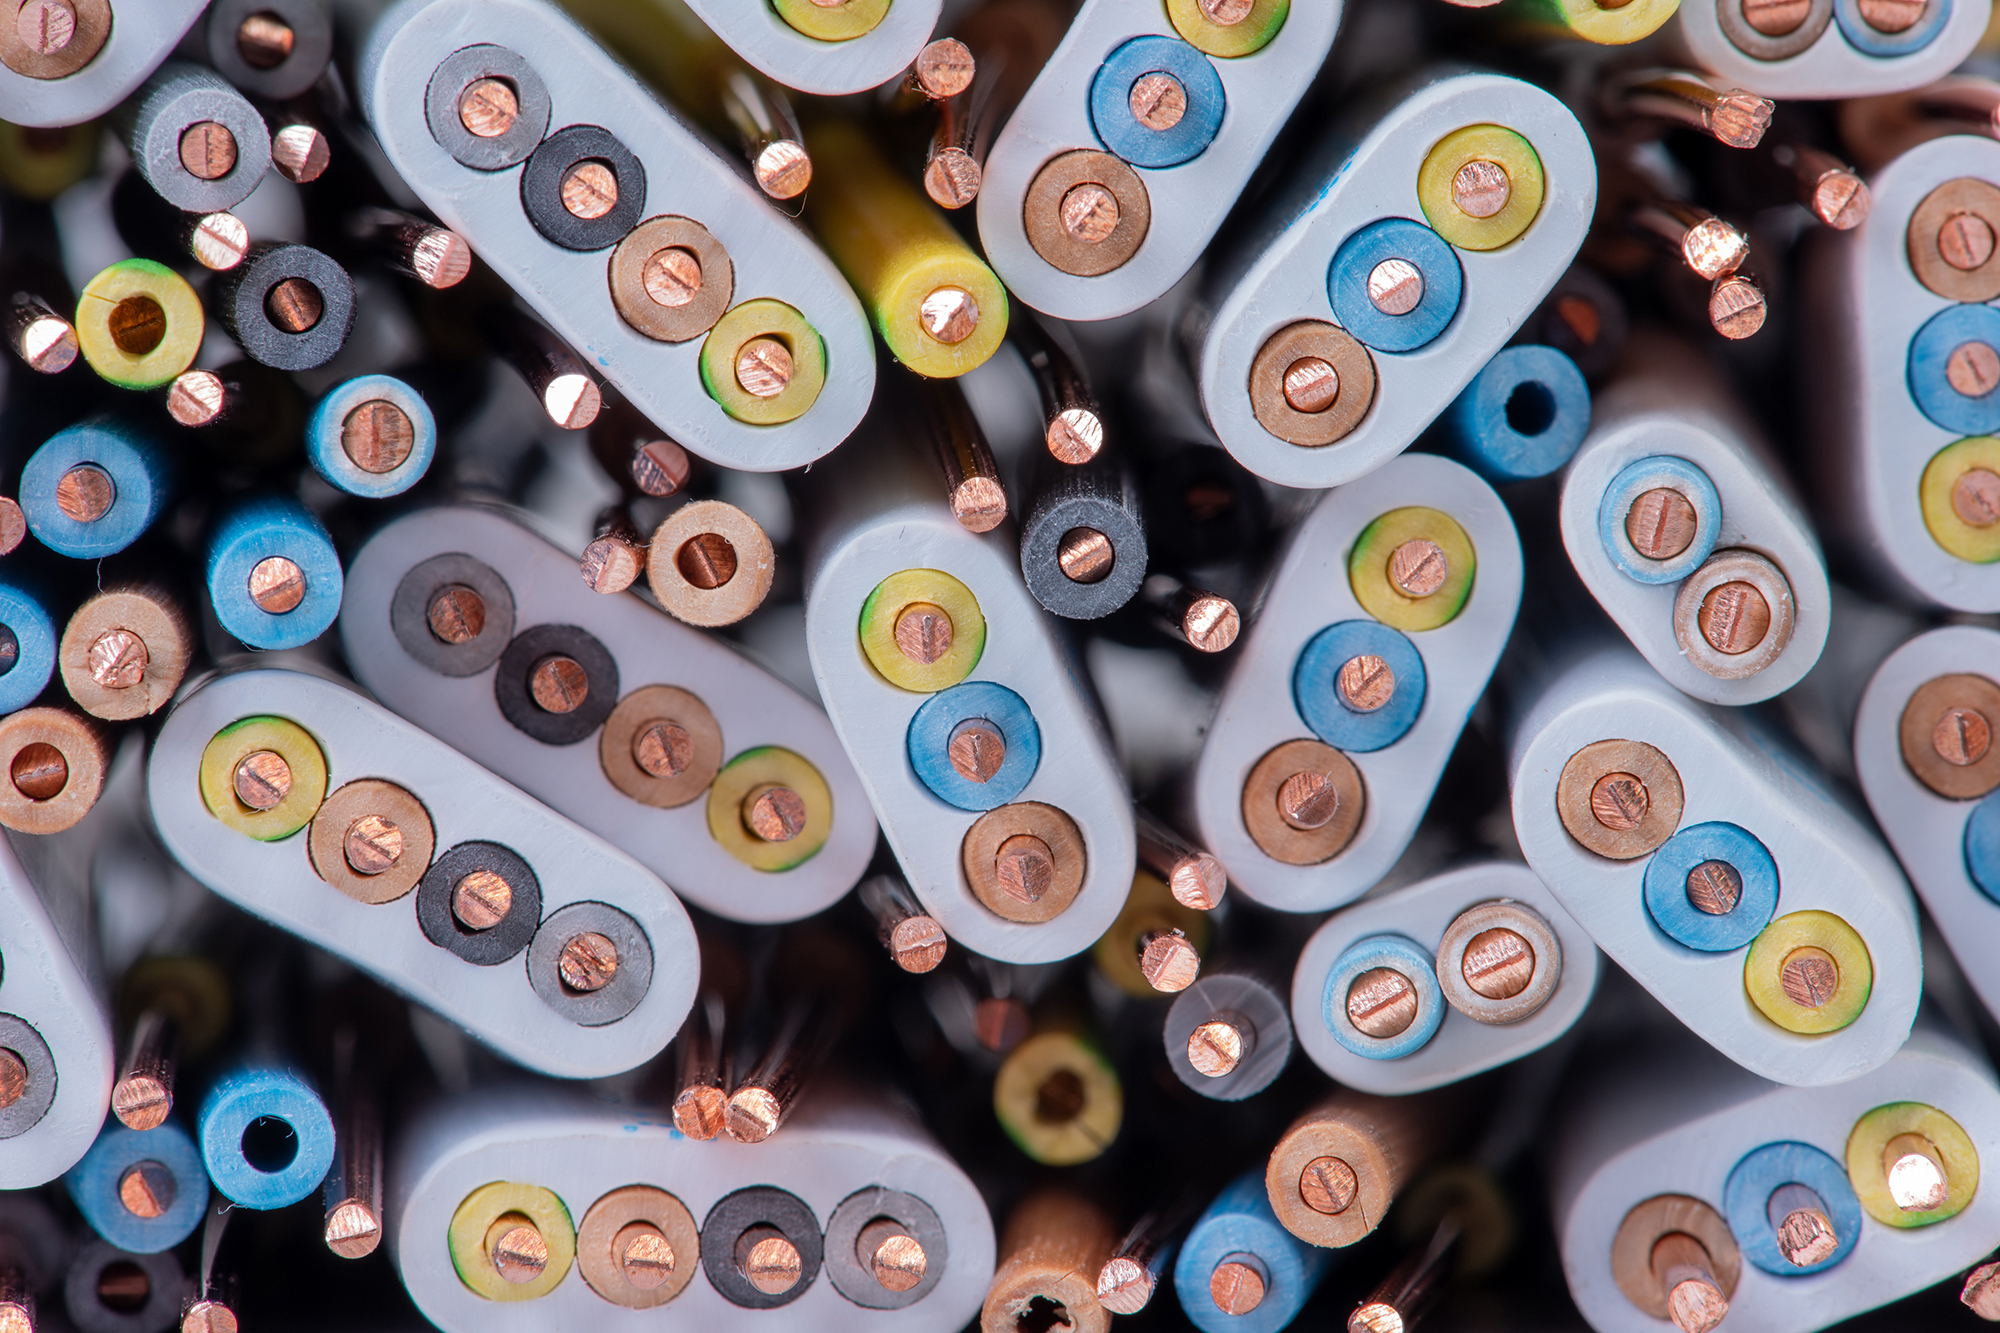 An assortment of copper cables and wires used in electronics and electricity production.